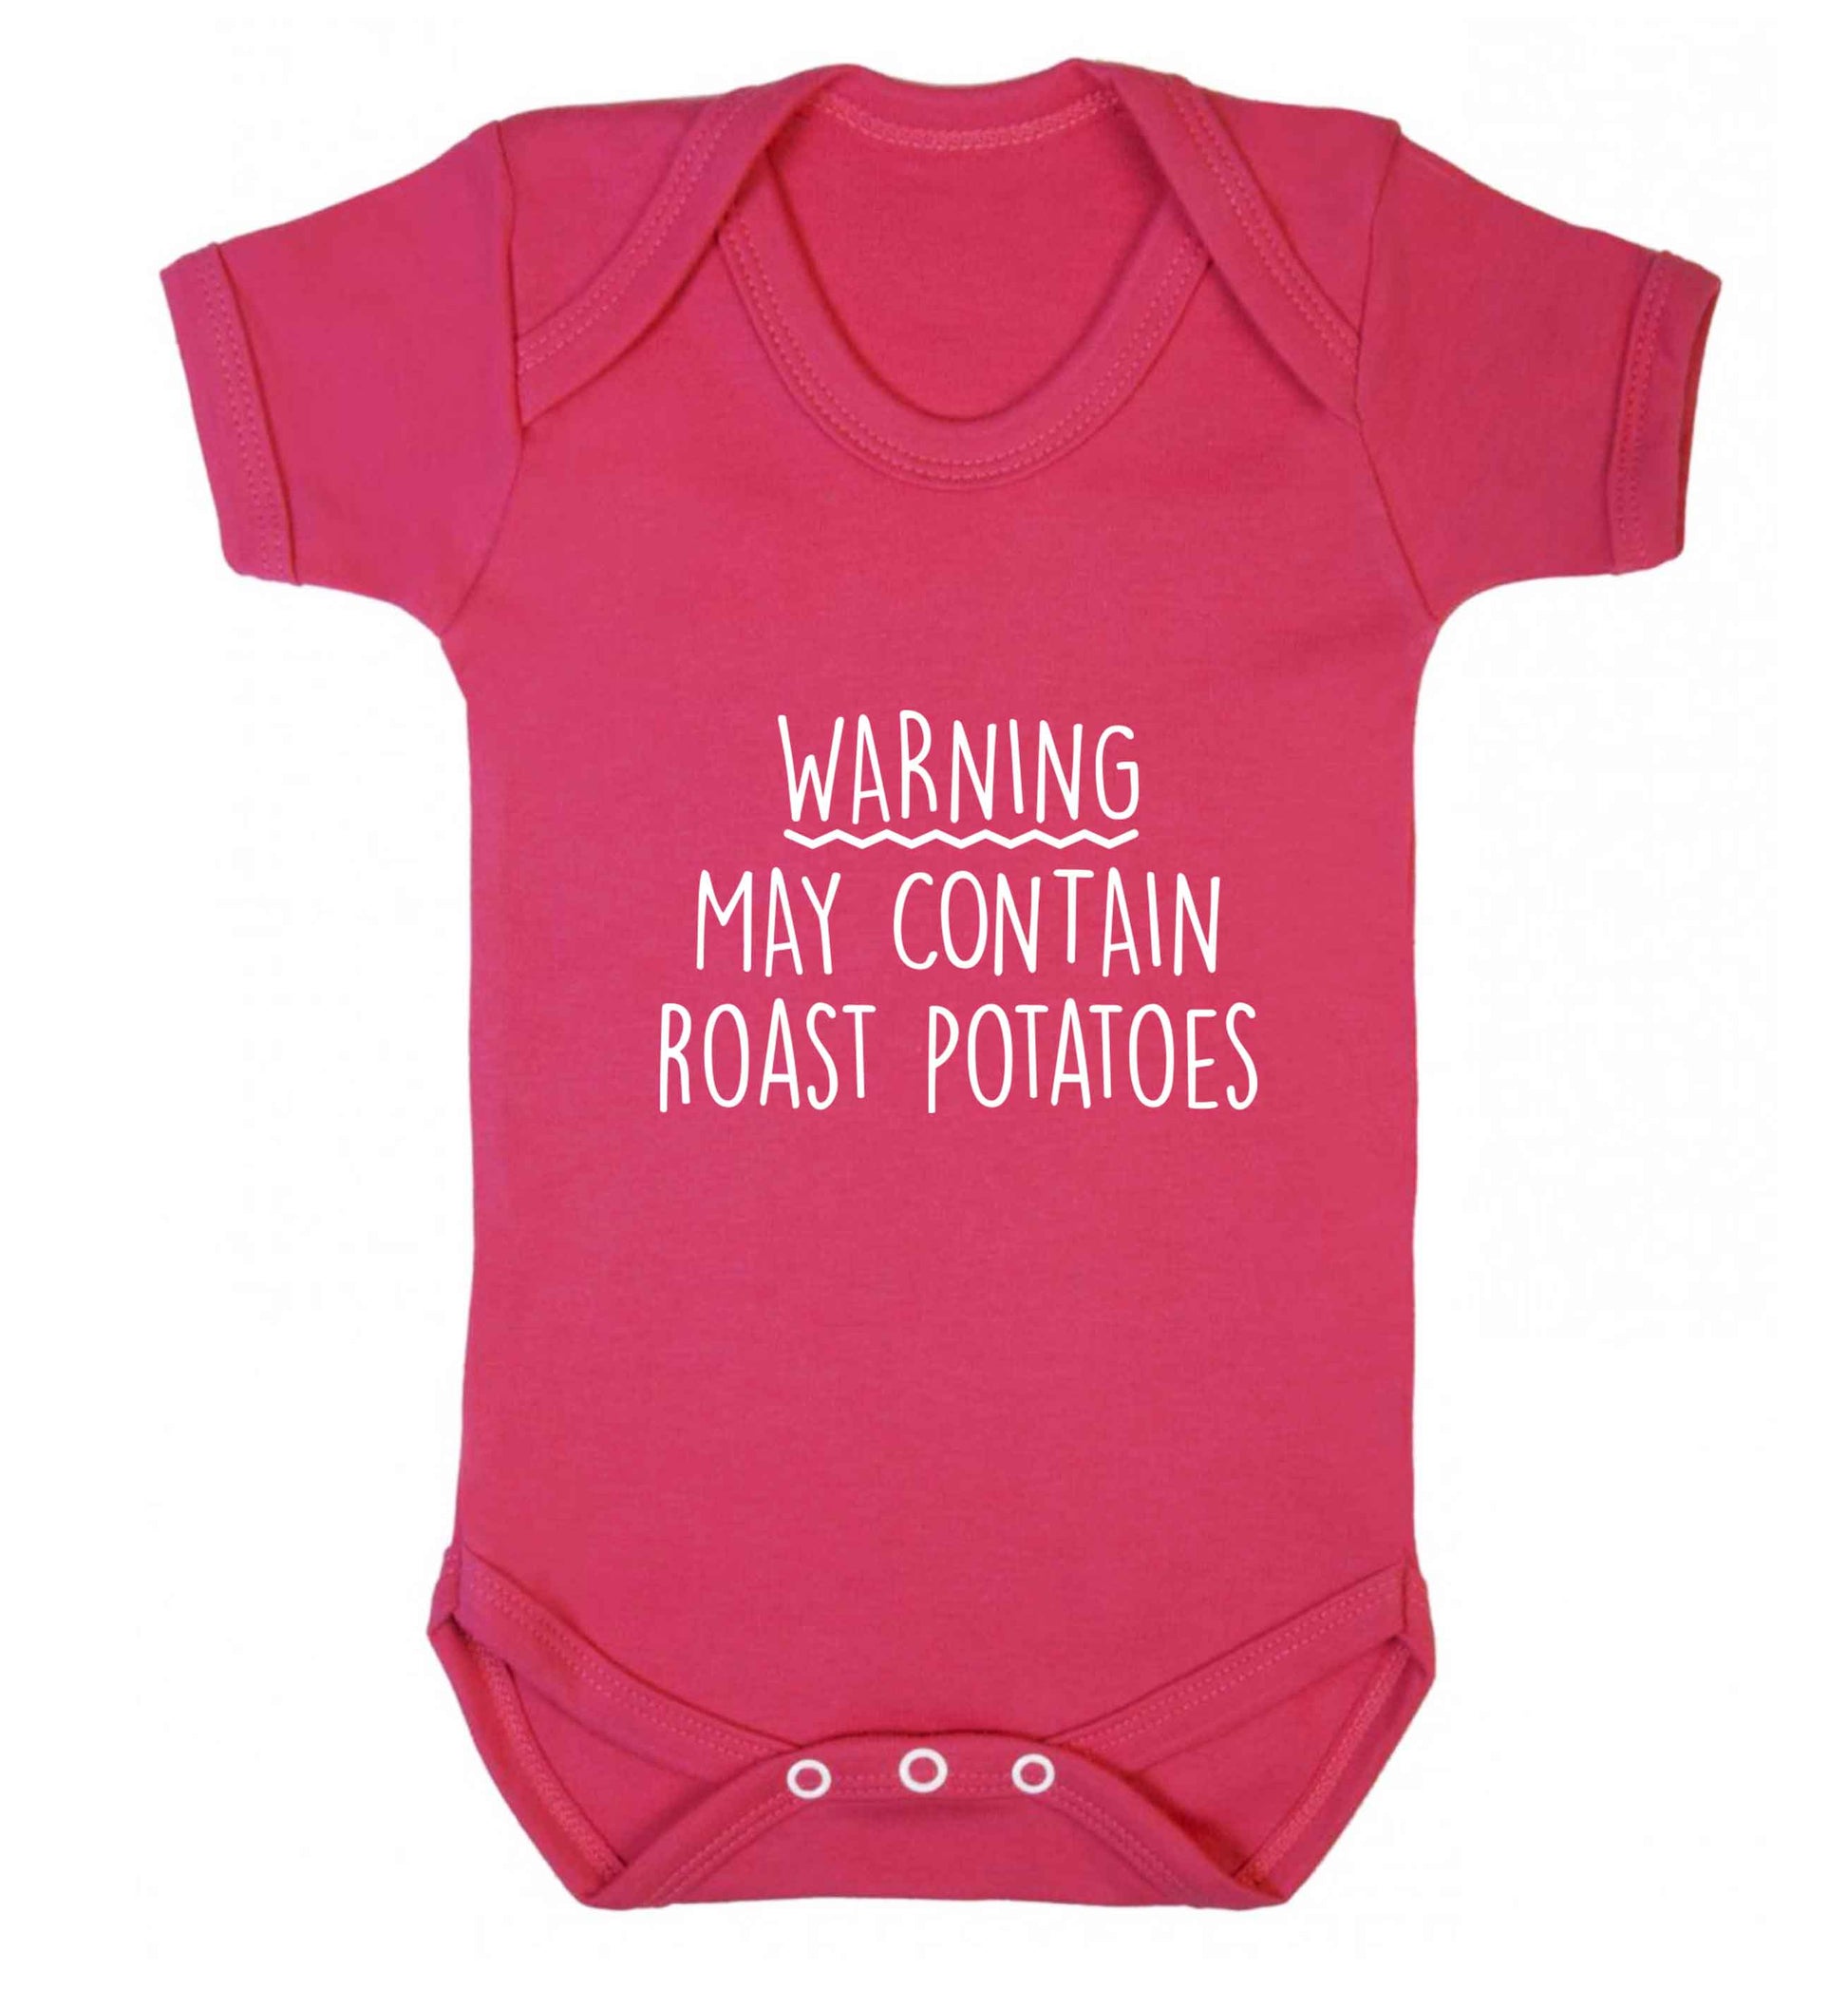 Warning may containg roast potatoes baby vest dark pink 18-24 months